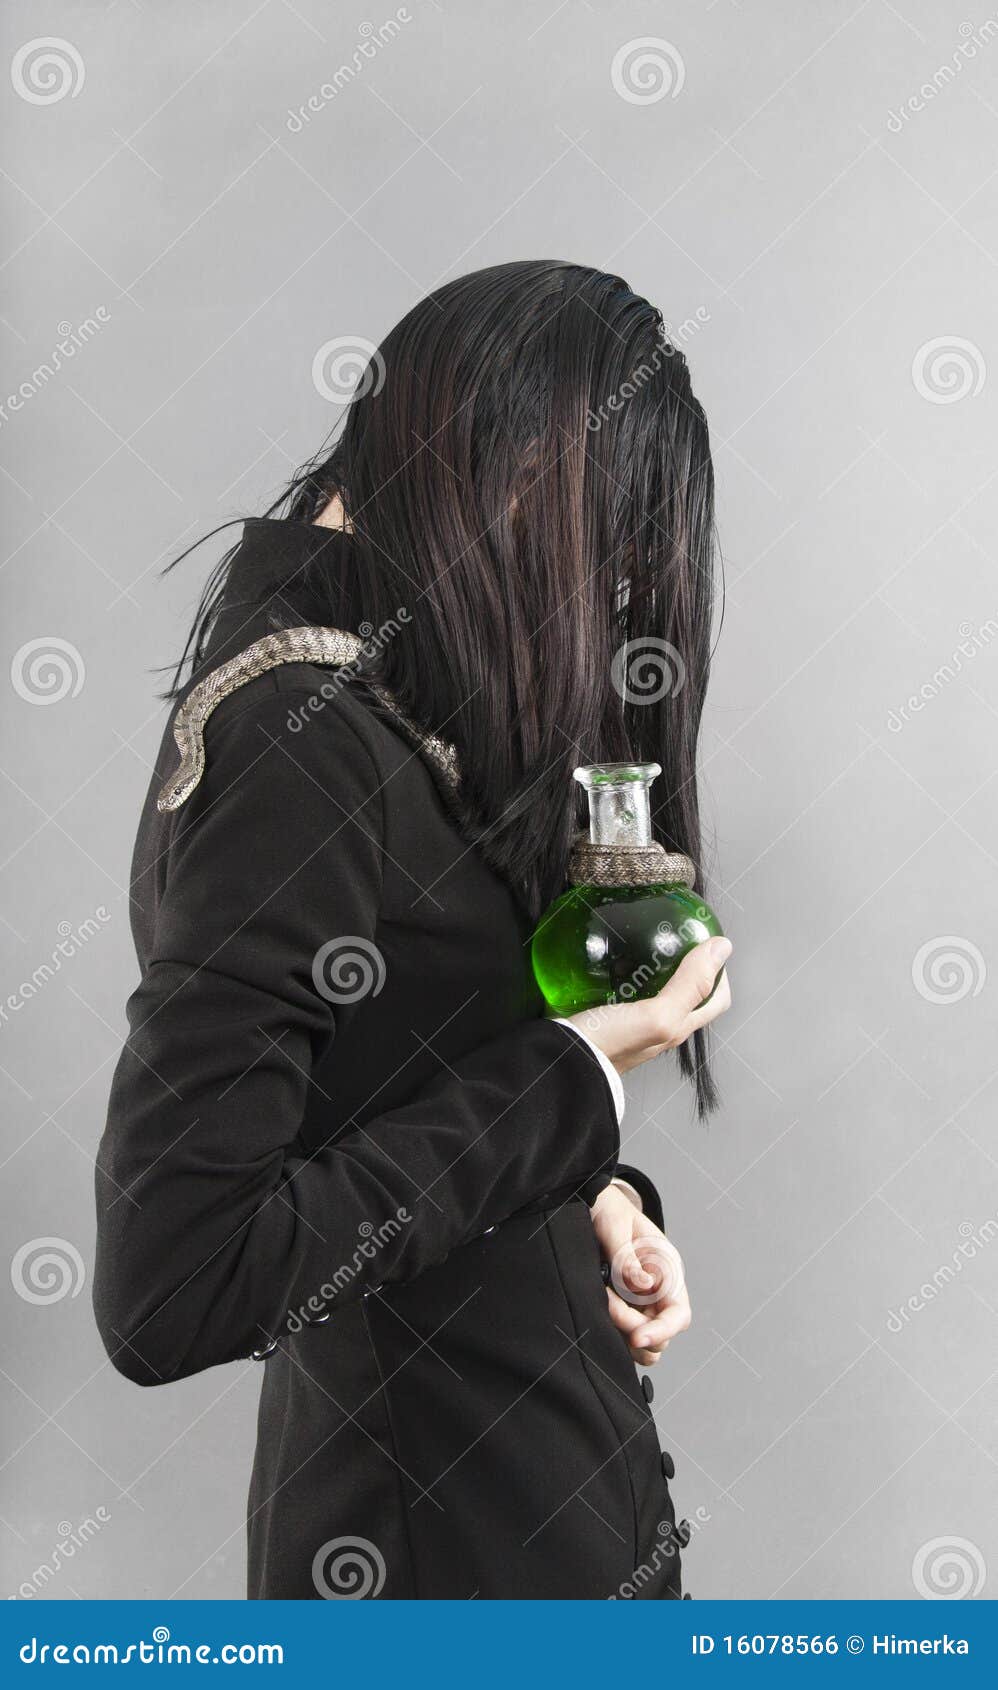 sad person with snake holding poison